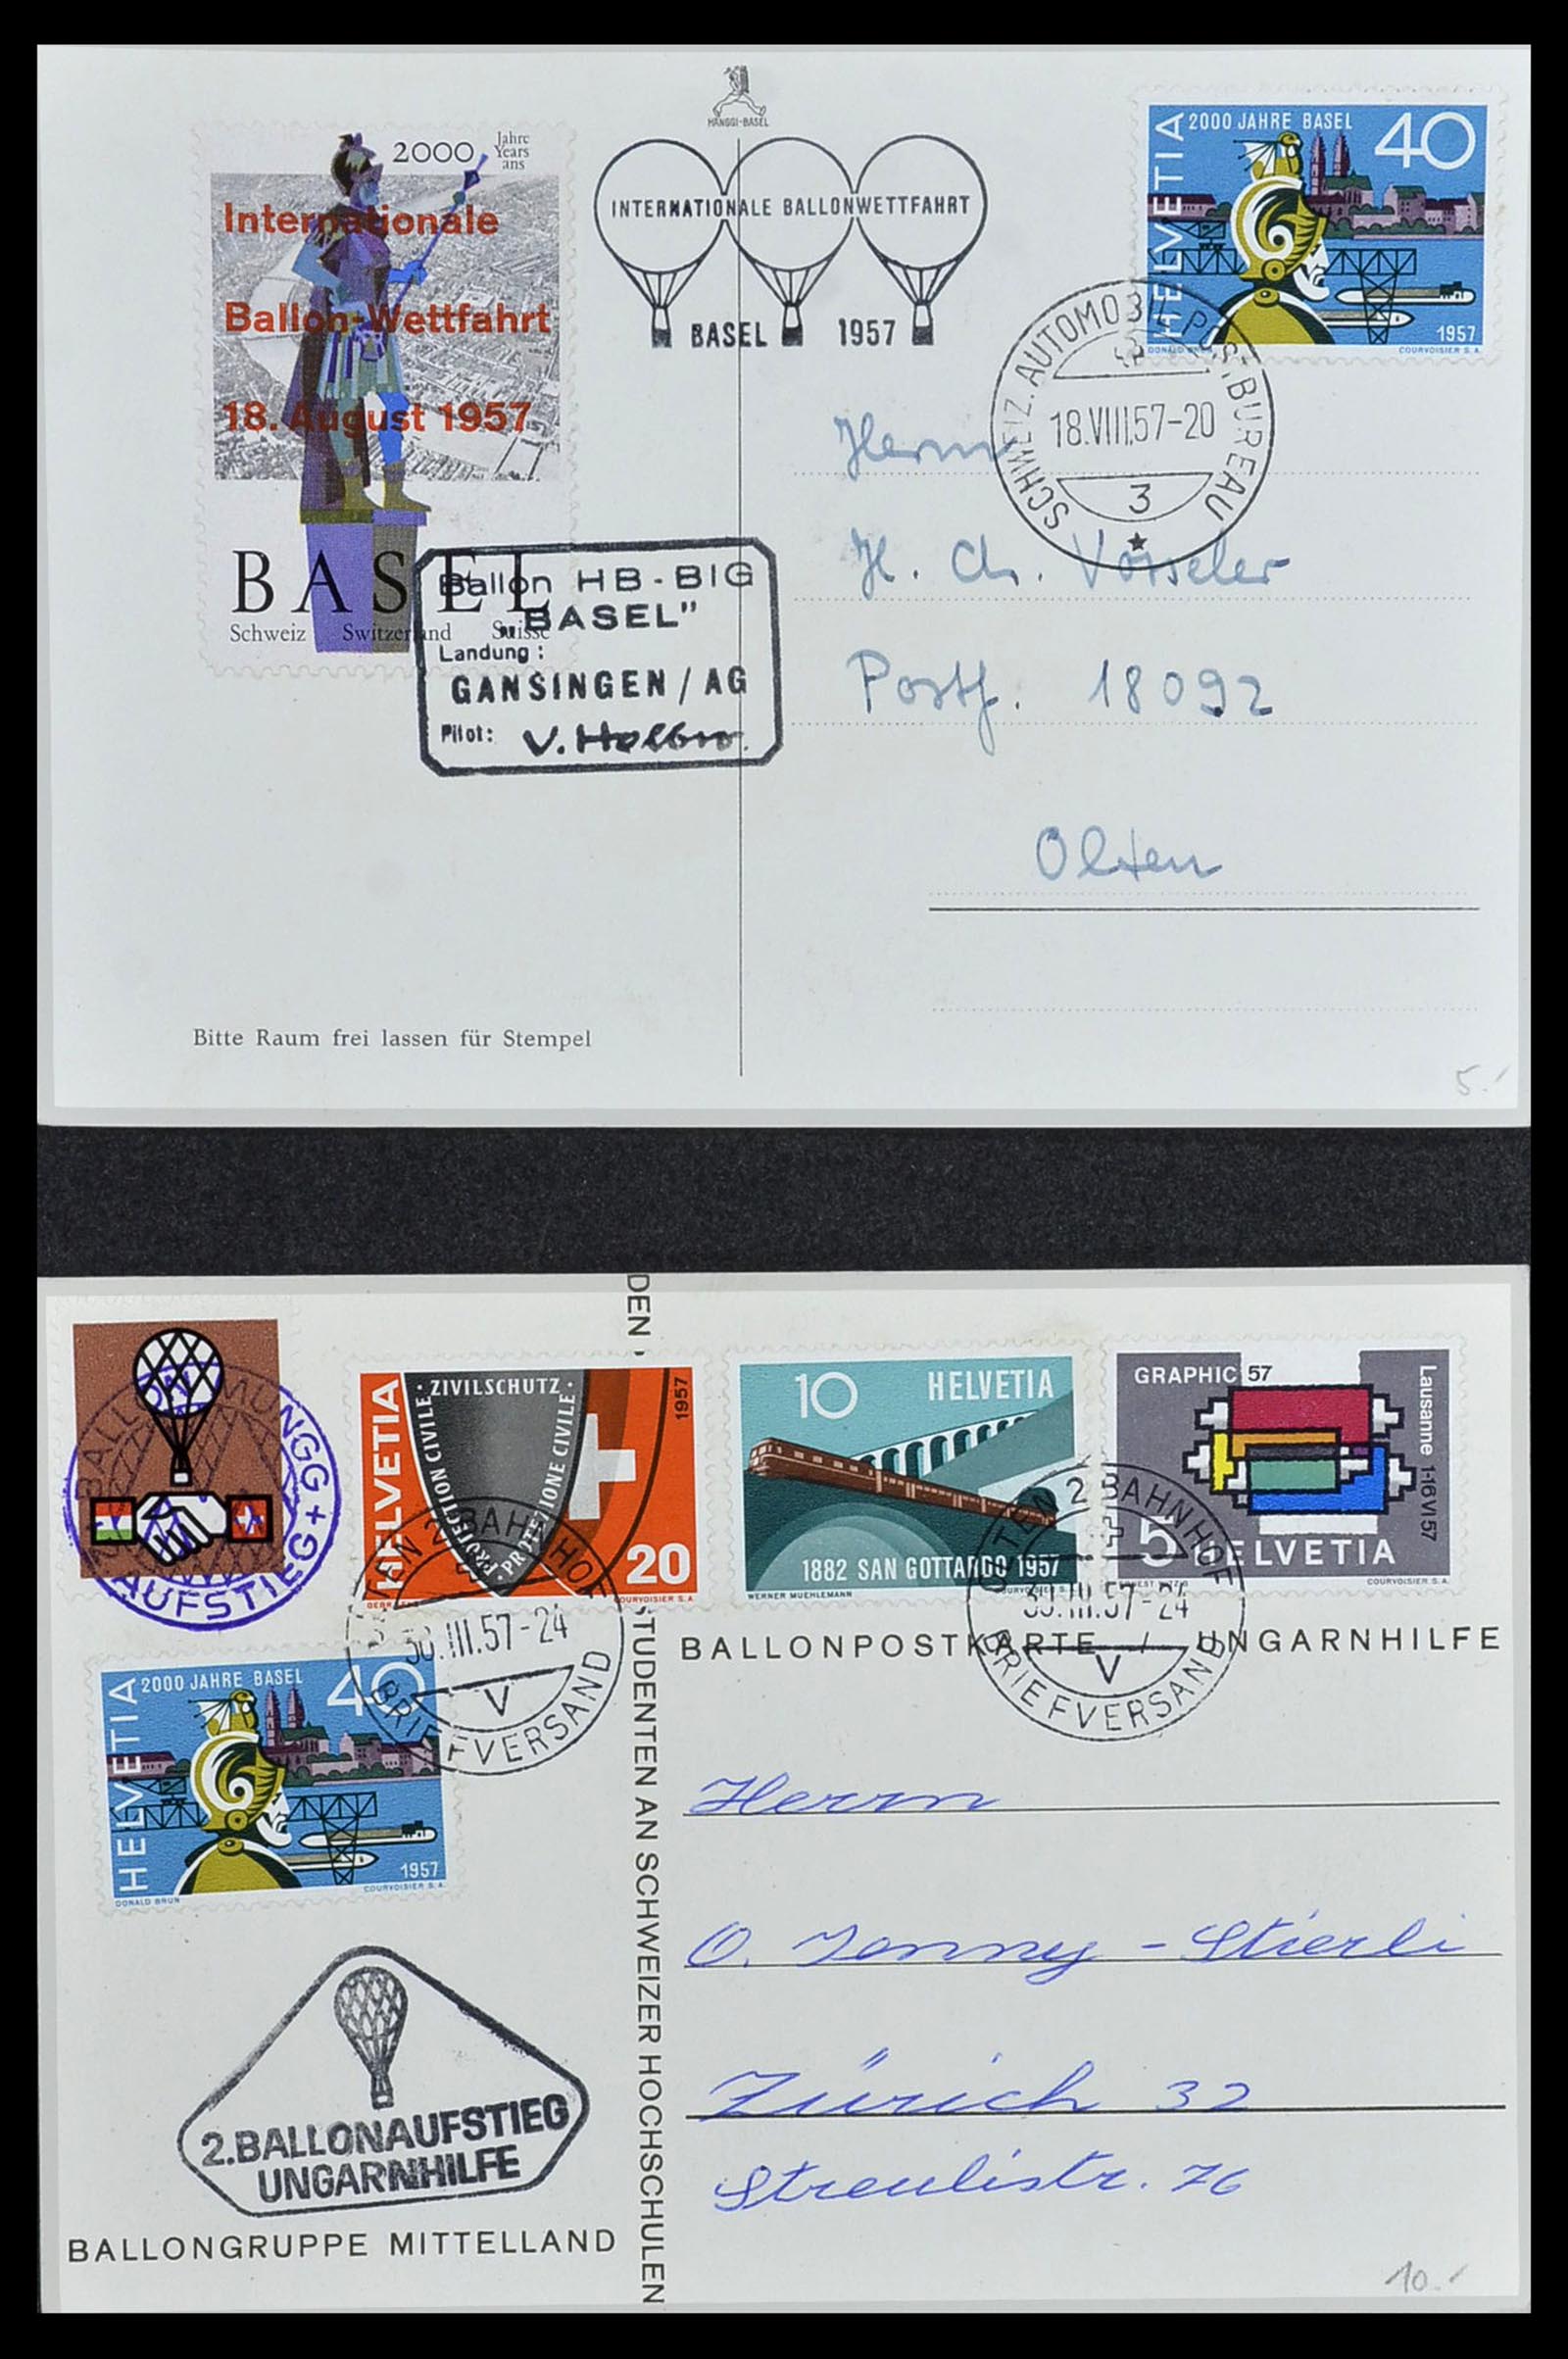 34141 103 - Stamp collection 34141 Switzerland airmail covers 1920-1960.